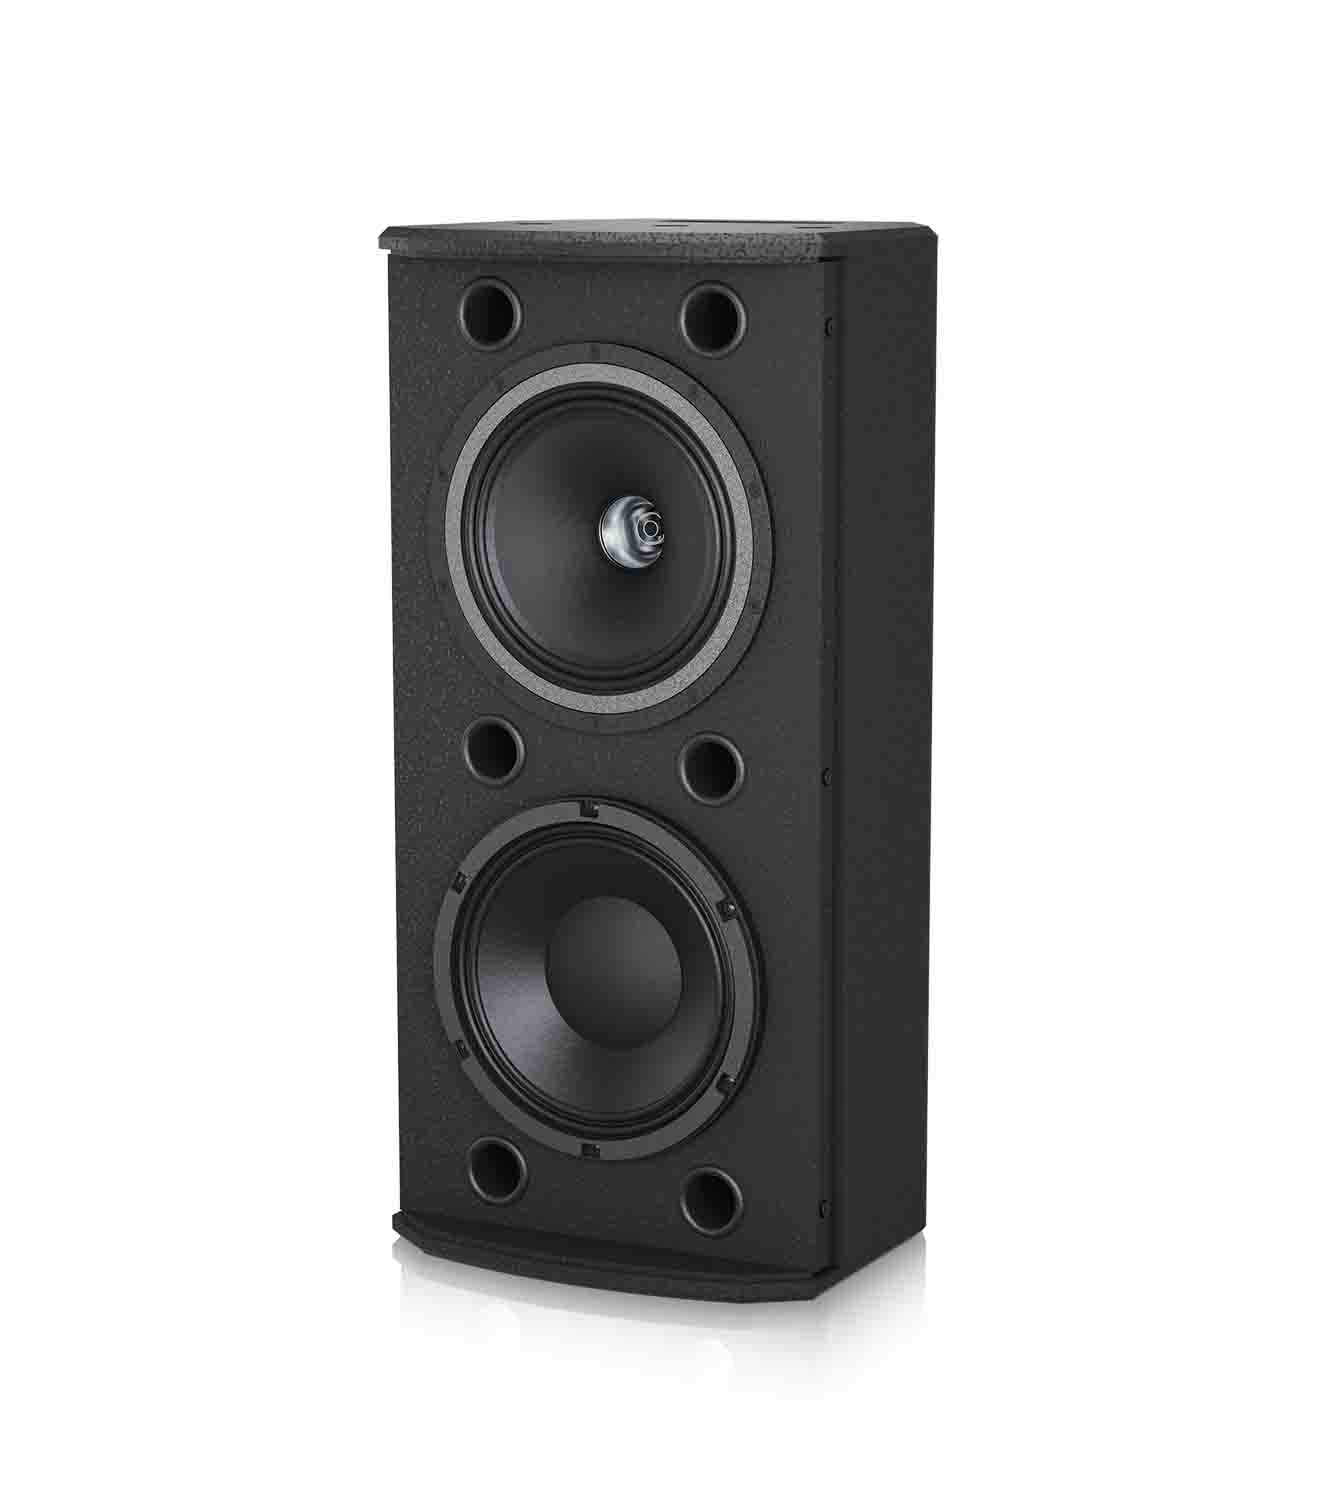 Tannoy VX 8.2 Dual Concentric Full Range Loudspeaker with Low-Frequency Driver for Portable and Installation Applications - Hollywood DJ